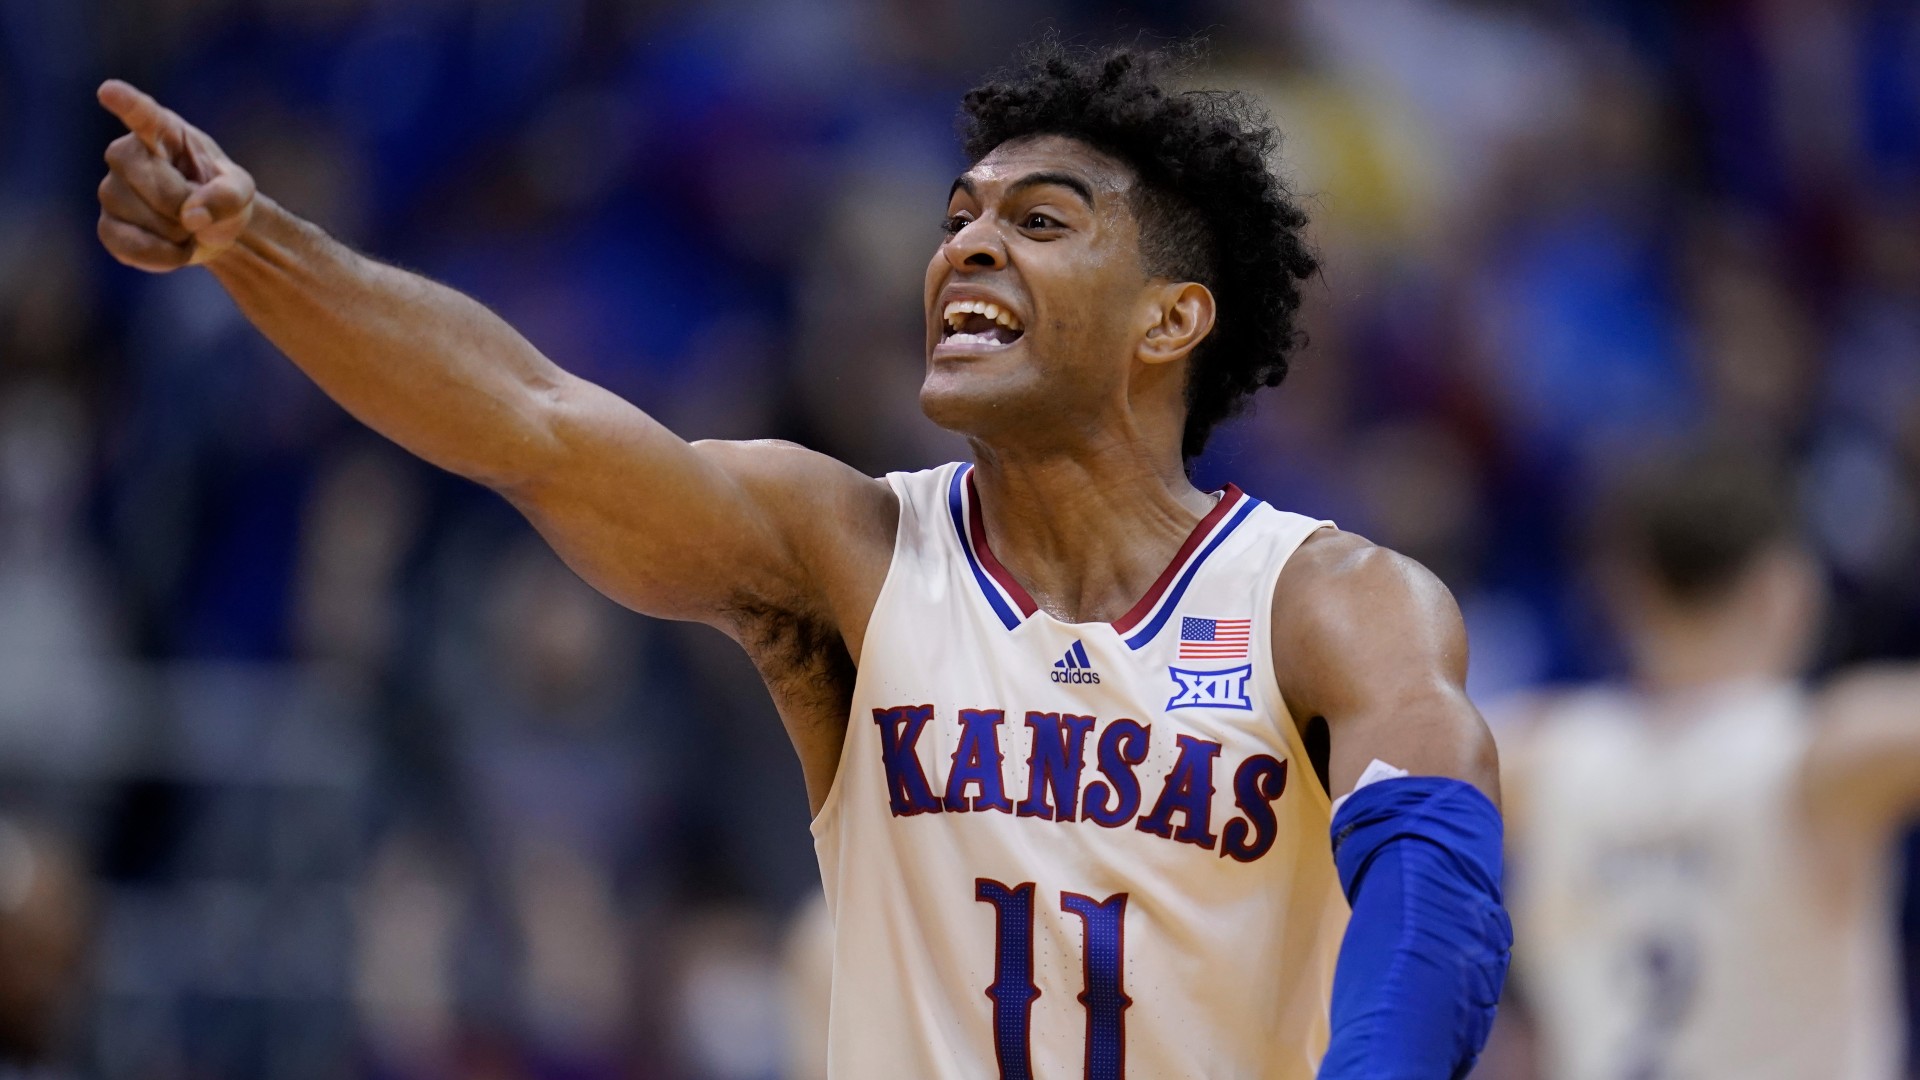 Kansas vs. Colorado Odds, Picks, Prediction: Expect Jayhawks to Roll in Big 12 (Tuesday, Dec. 21) article feature image